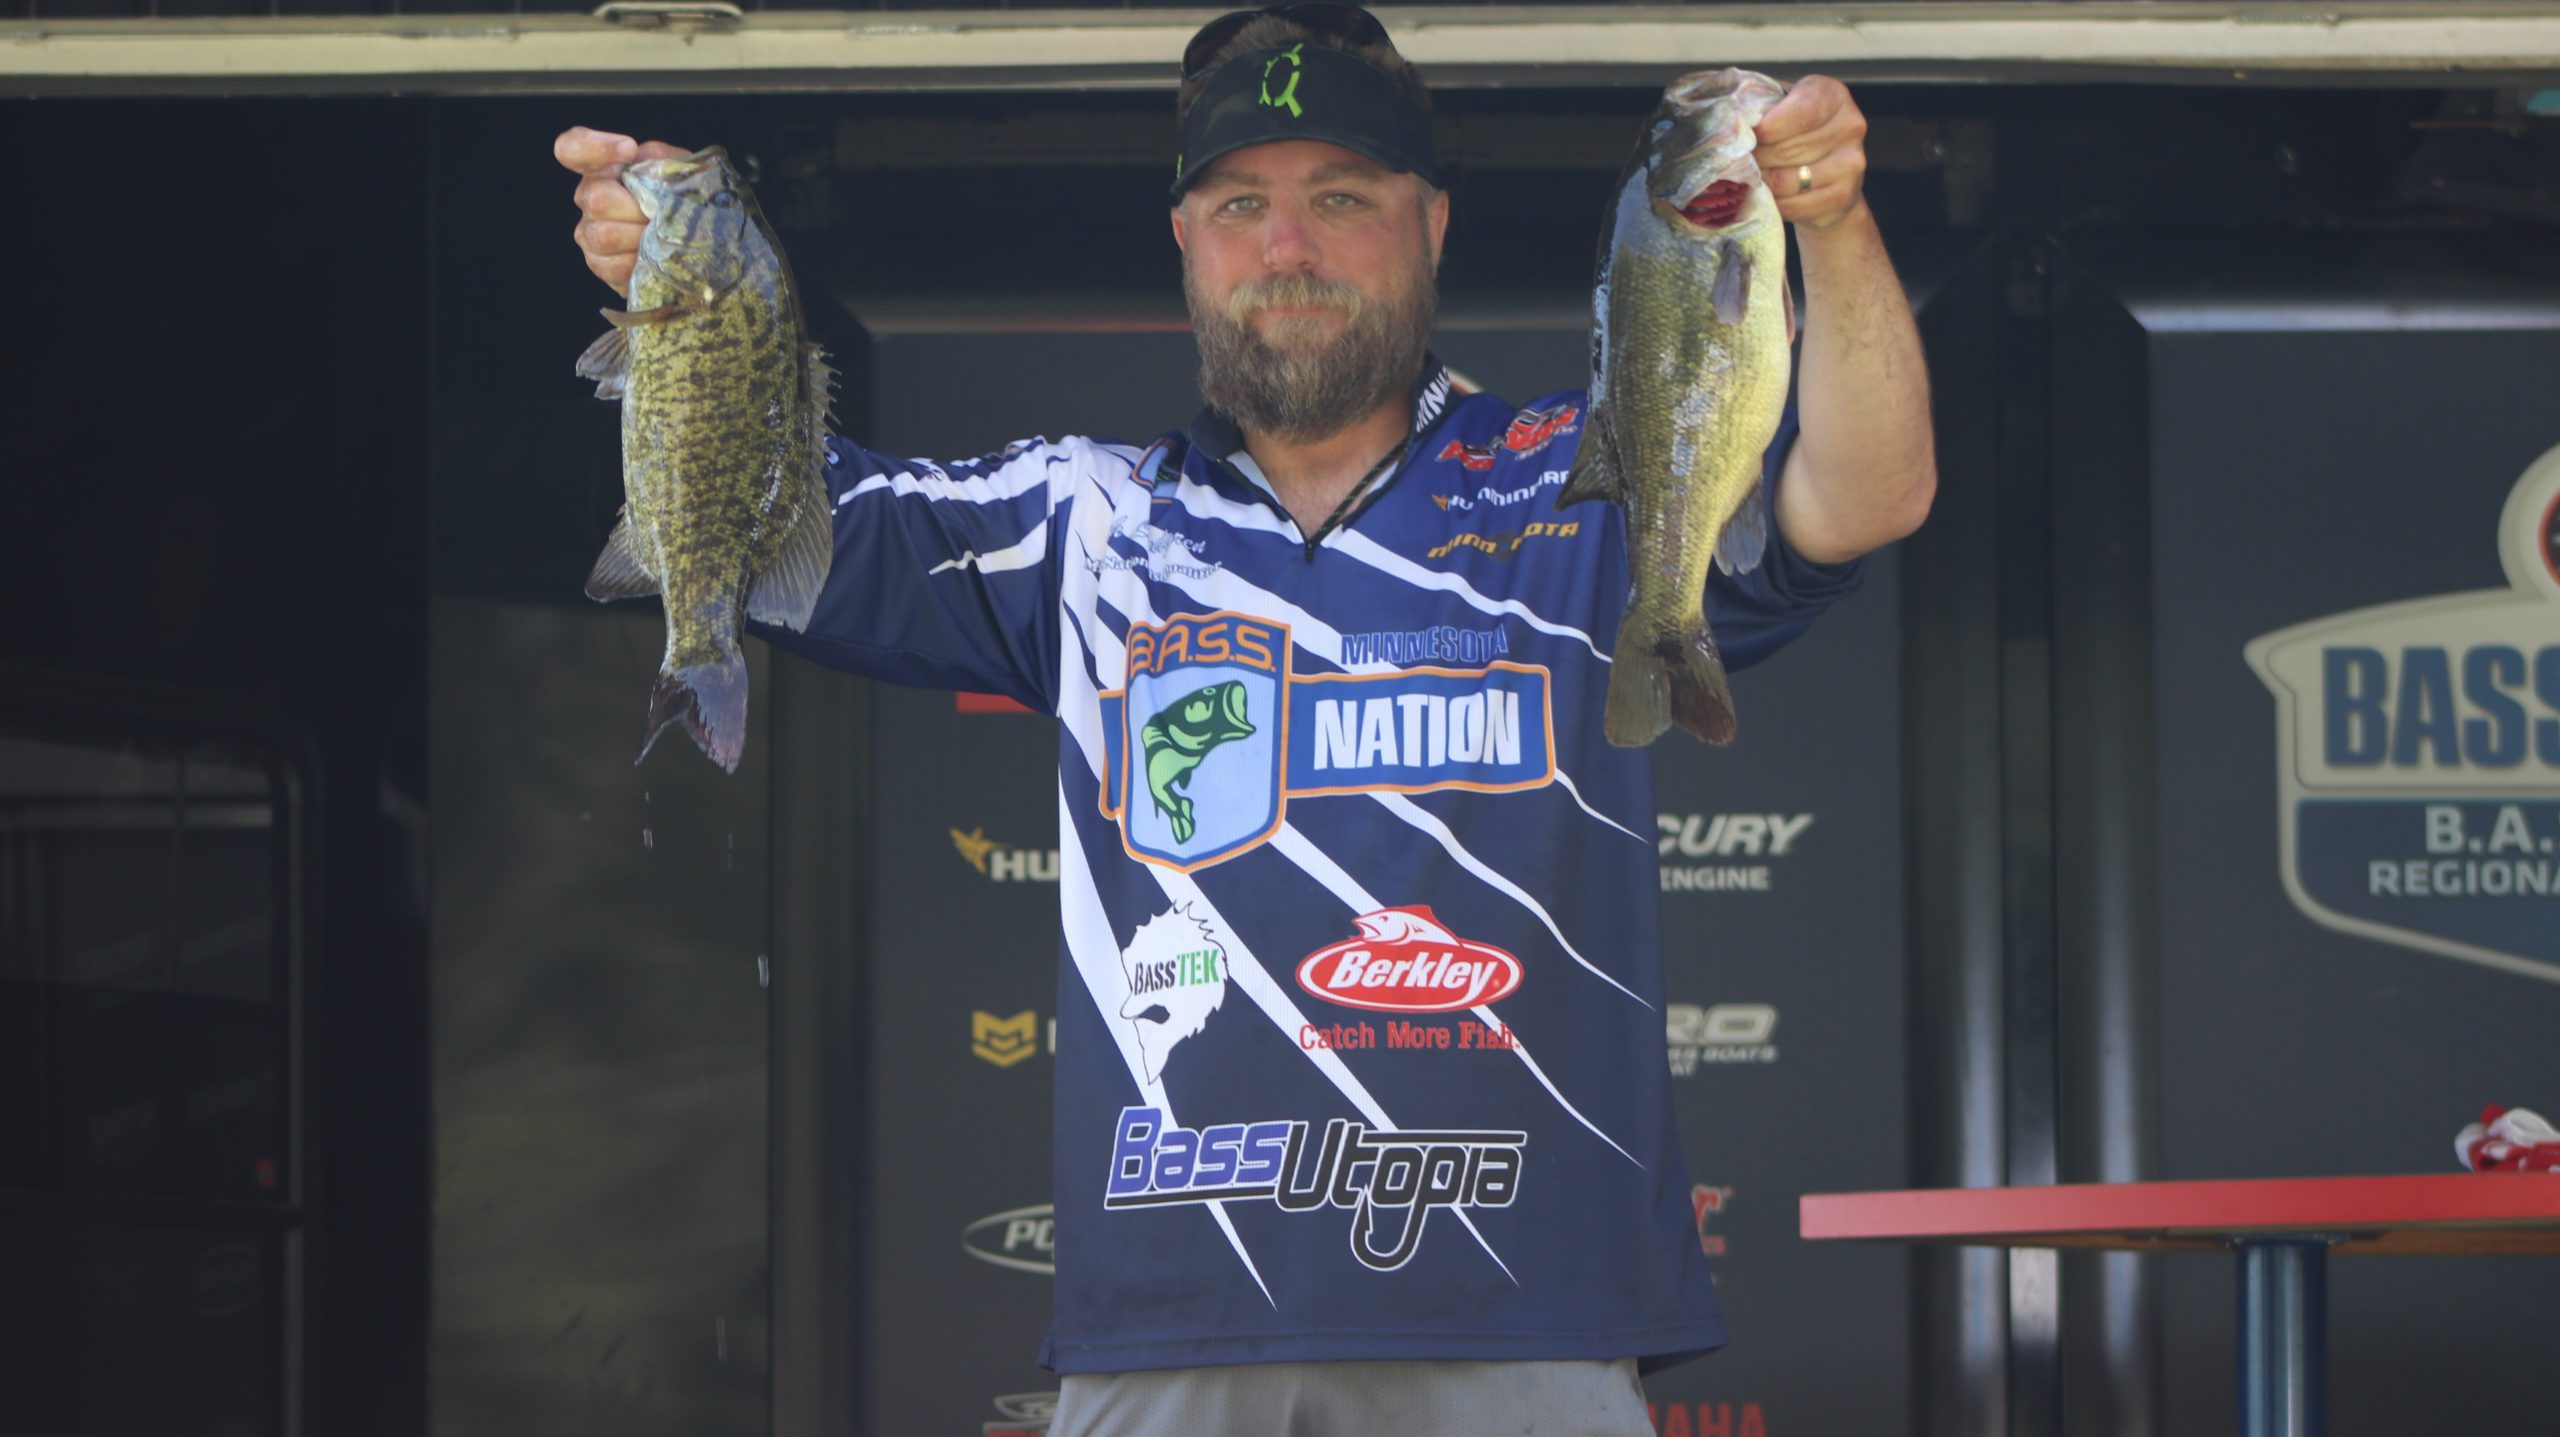 Minnesota Alternate Leads Day 1 Of B.A.S.S. Nation Northern Regional On Mississippi River